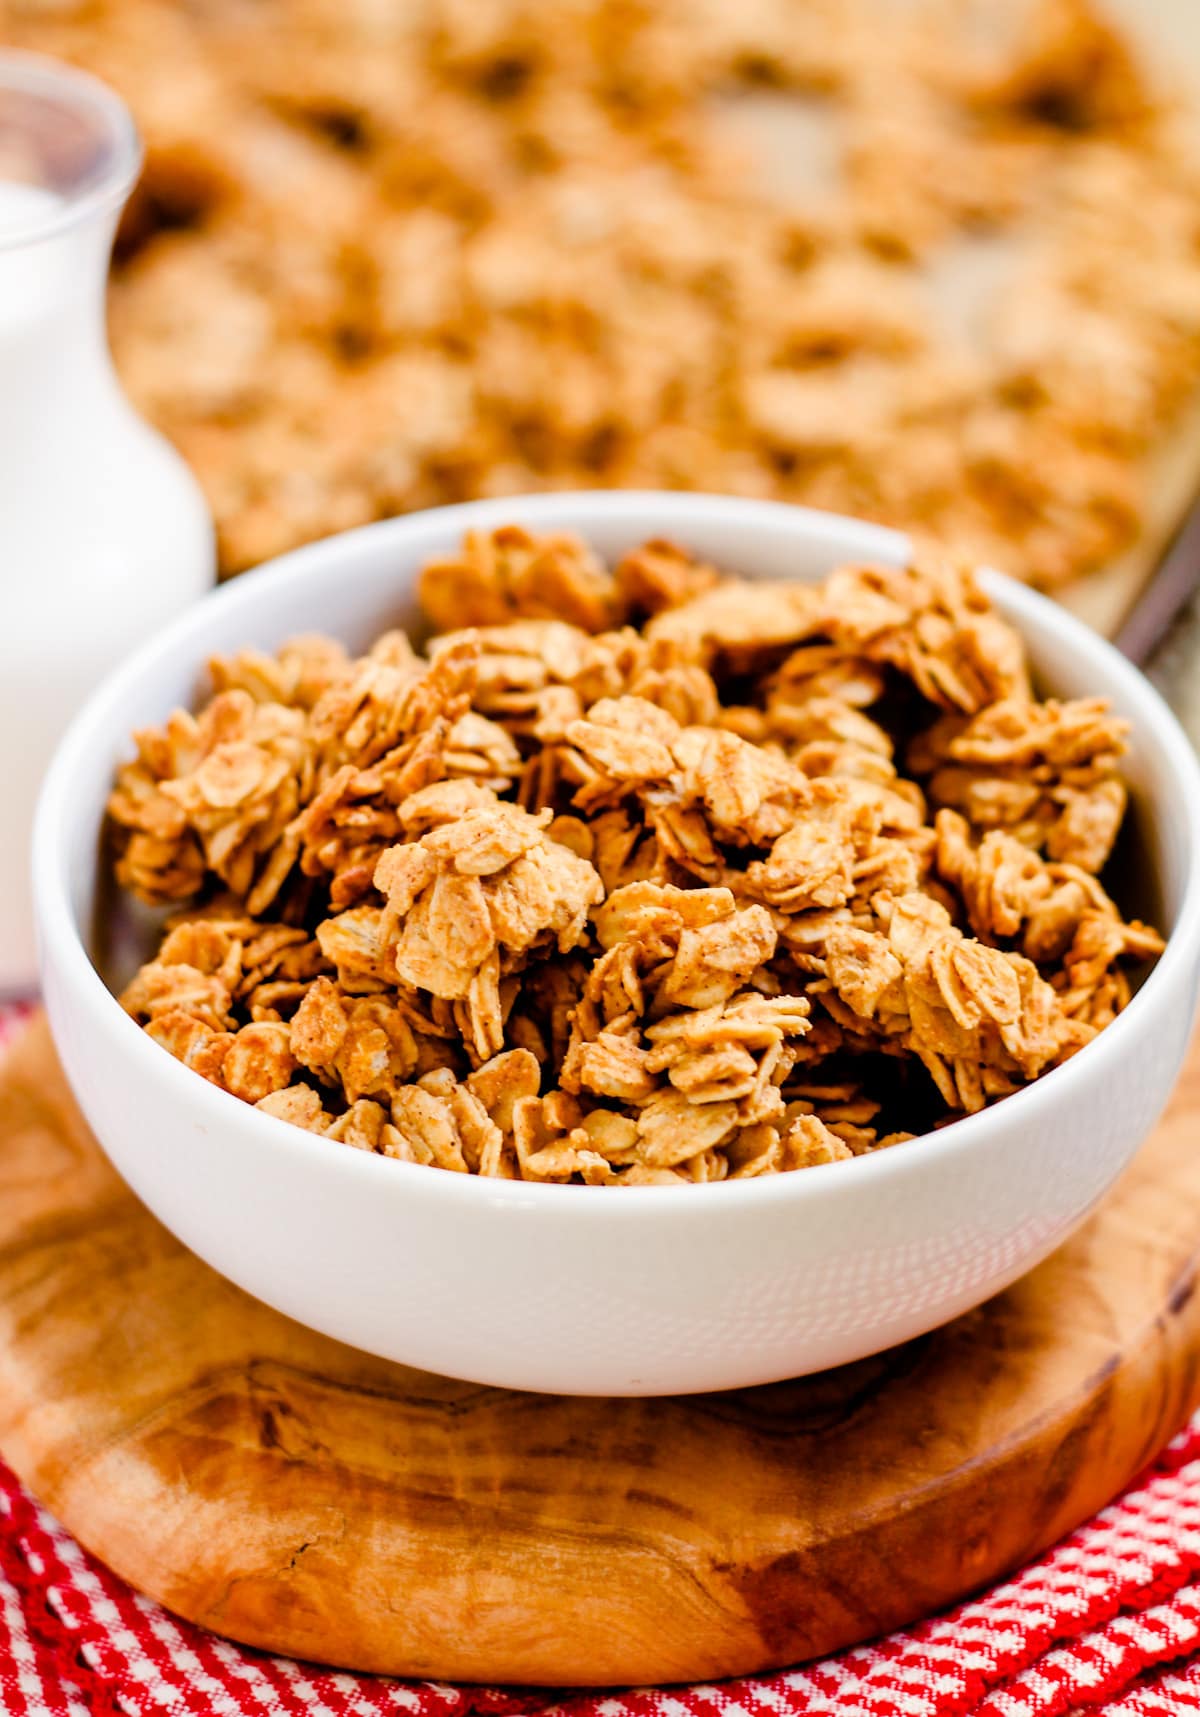 A bowl of easy homemade granola with a glass of milk behind it.